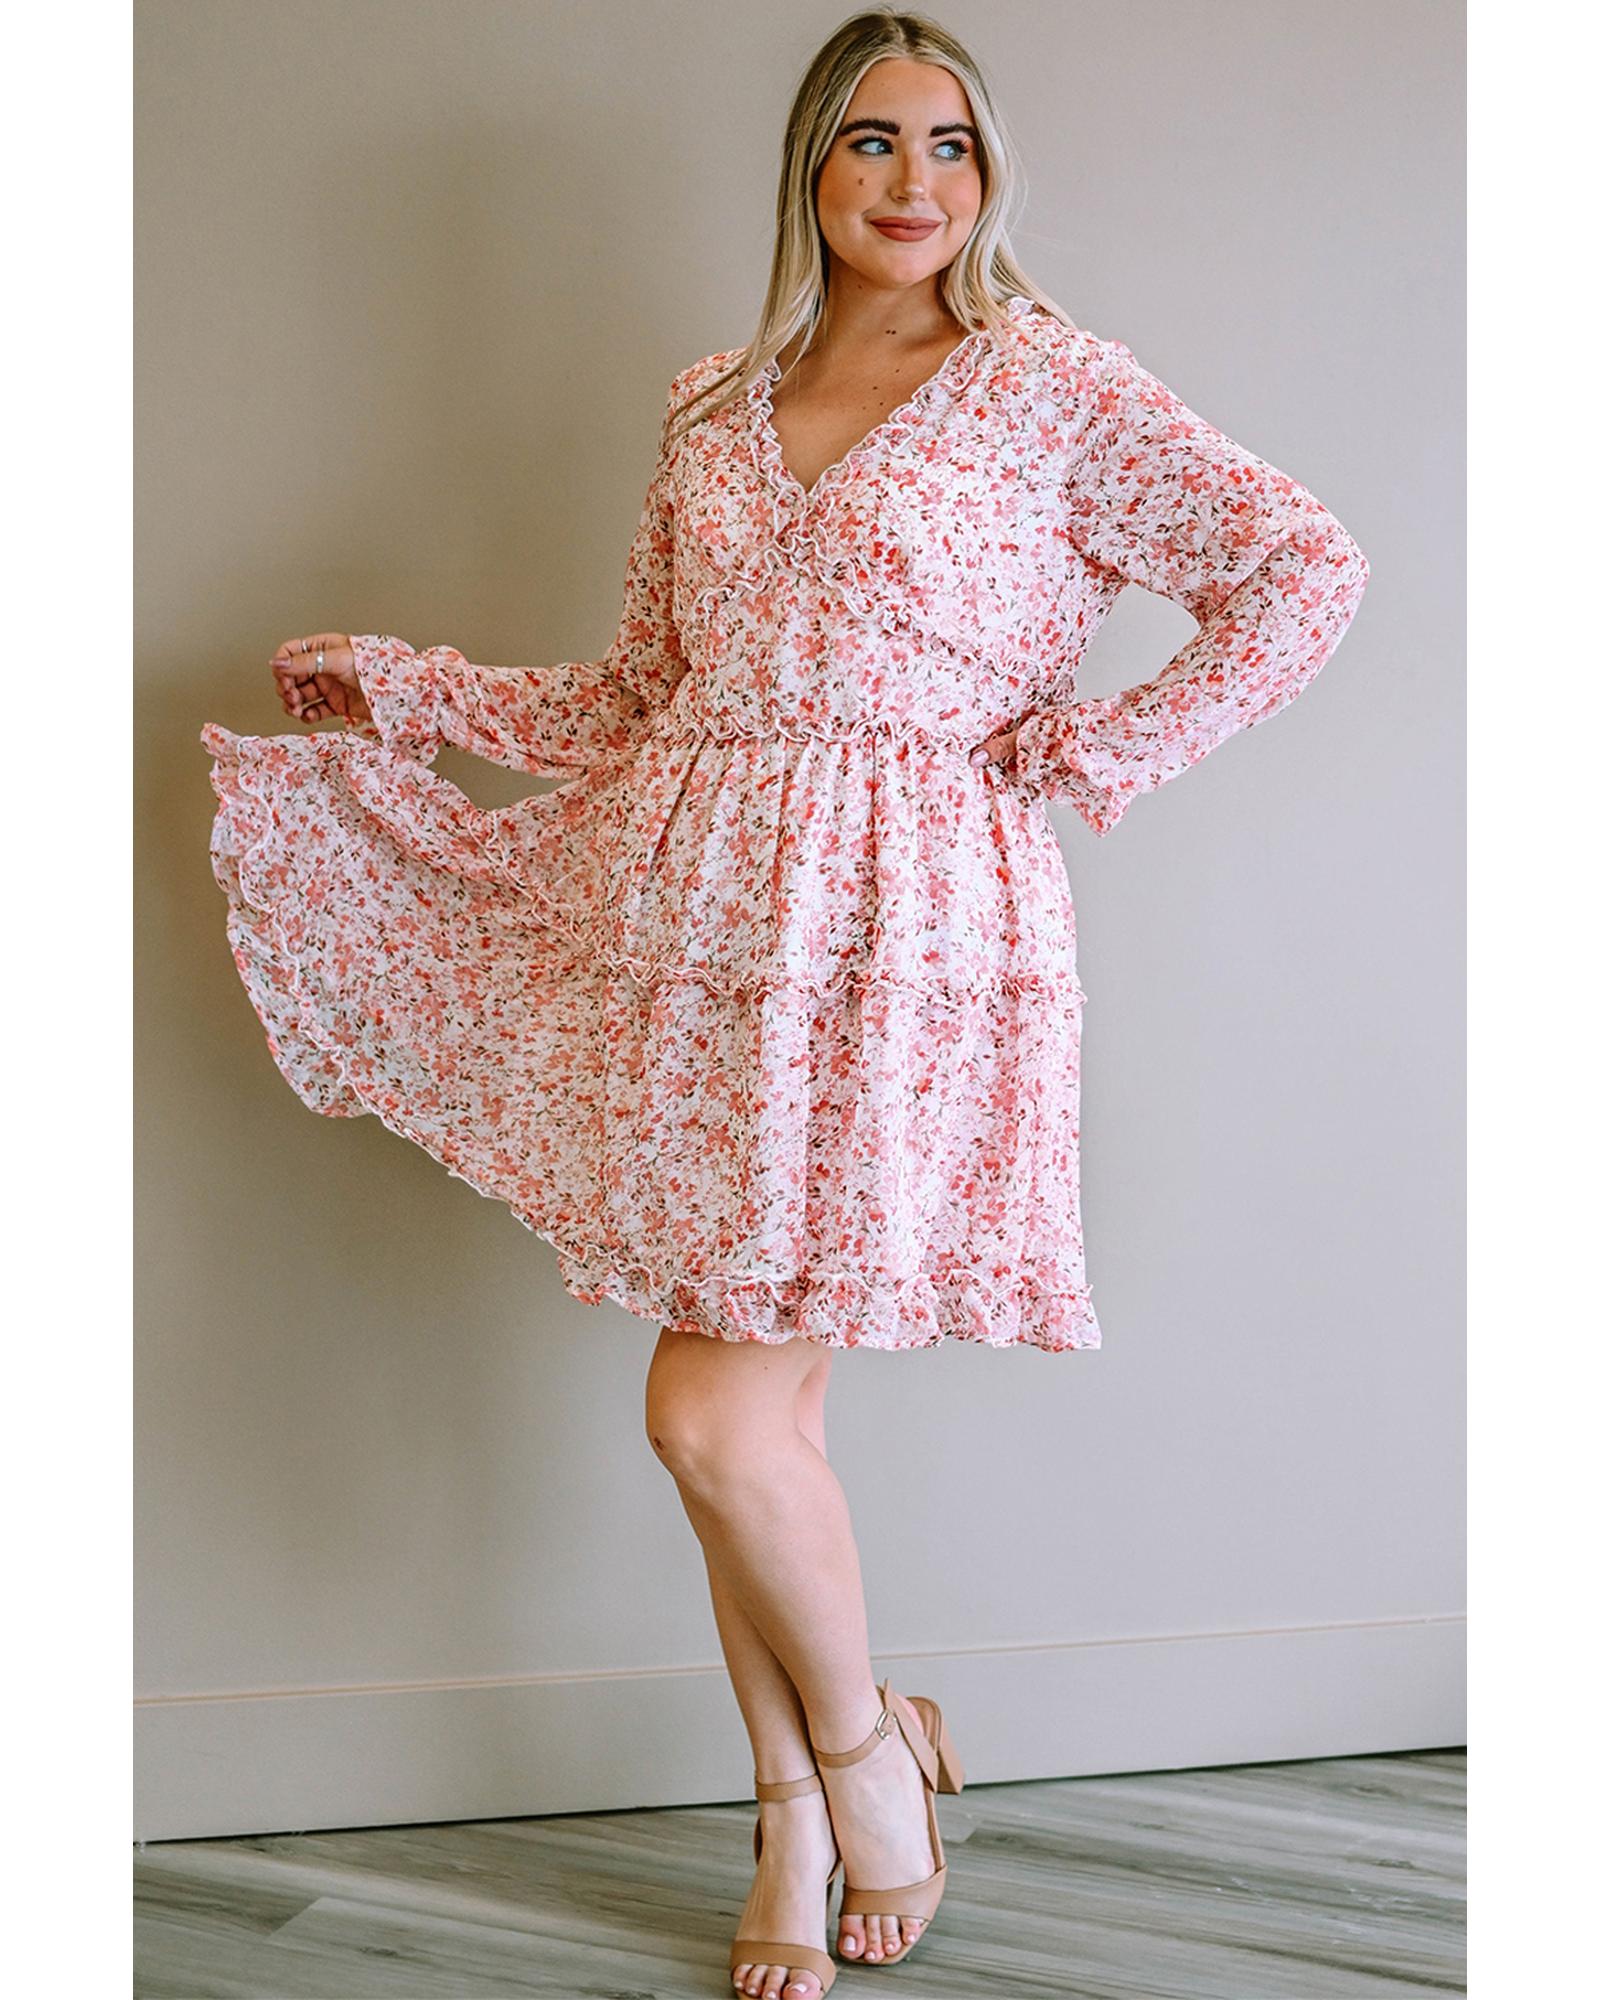 Pink Frilled Tiered Floral Plus Size Dress - Dresses -Size 5X | eBay